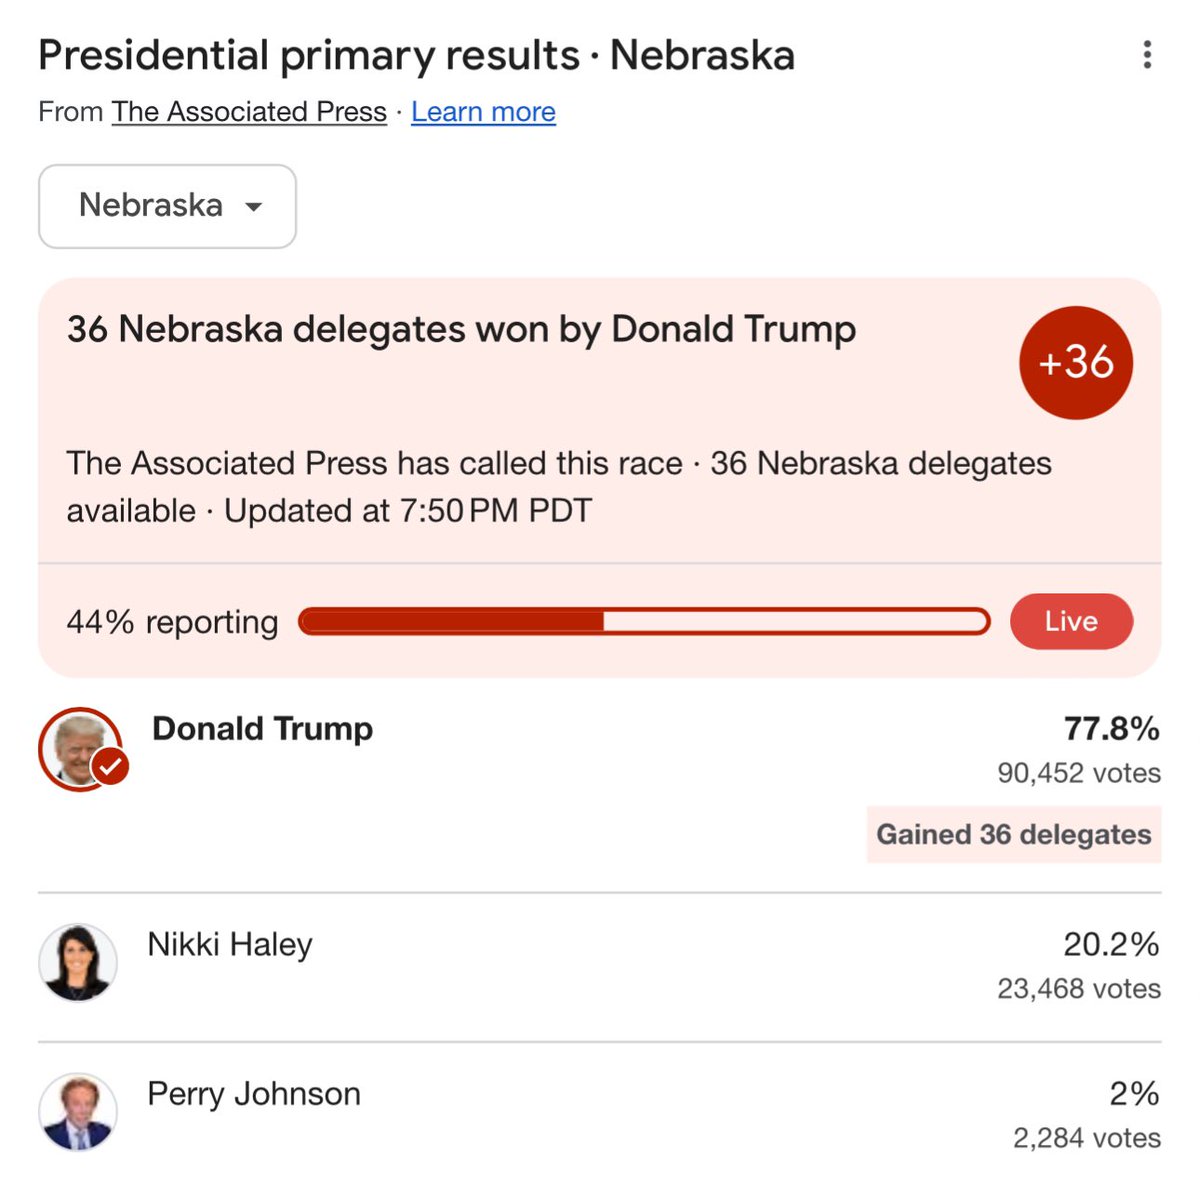 Trump is also losing over 20% of the vote to Nikki Haley in the NEBRASKA Republican Primary with 44% reporting.